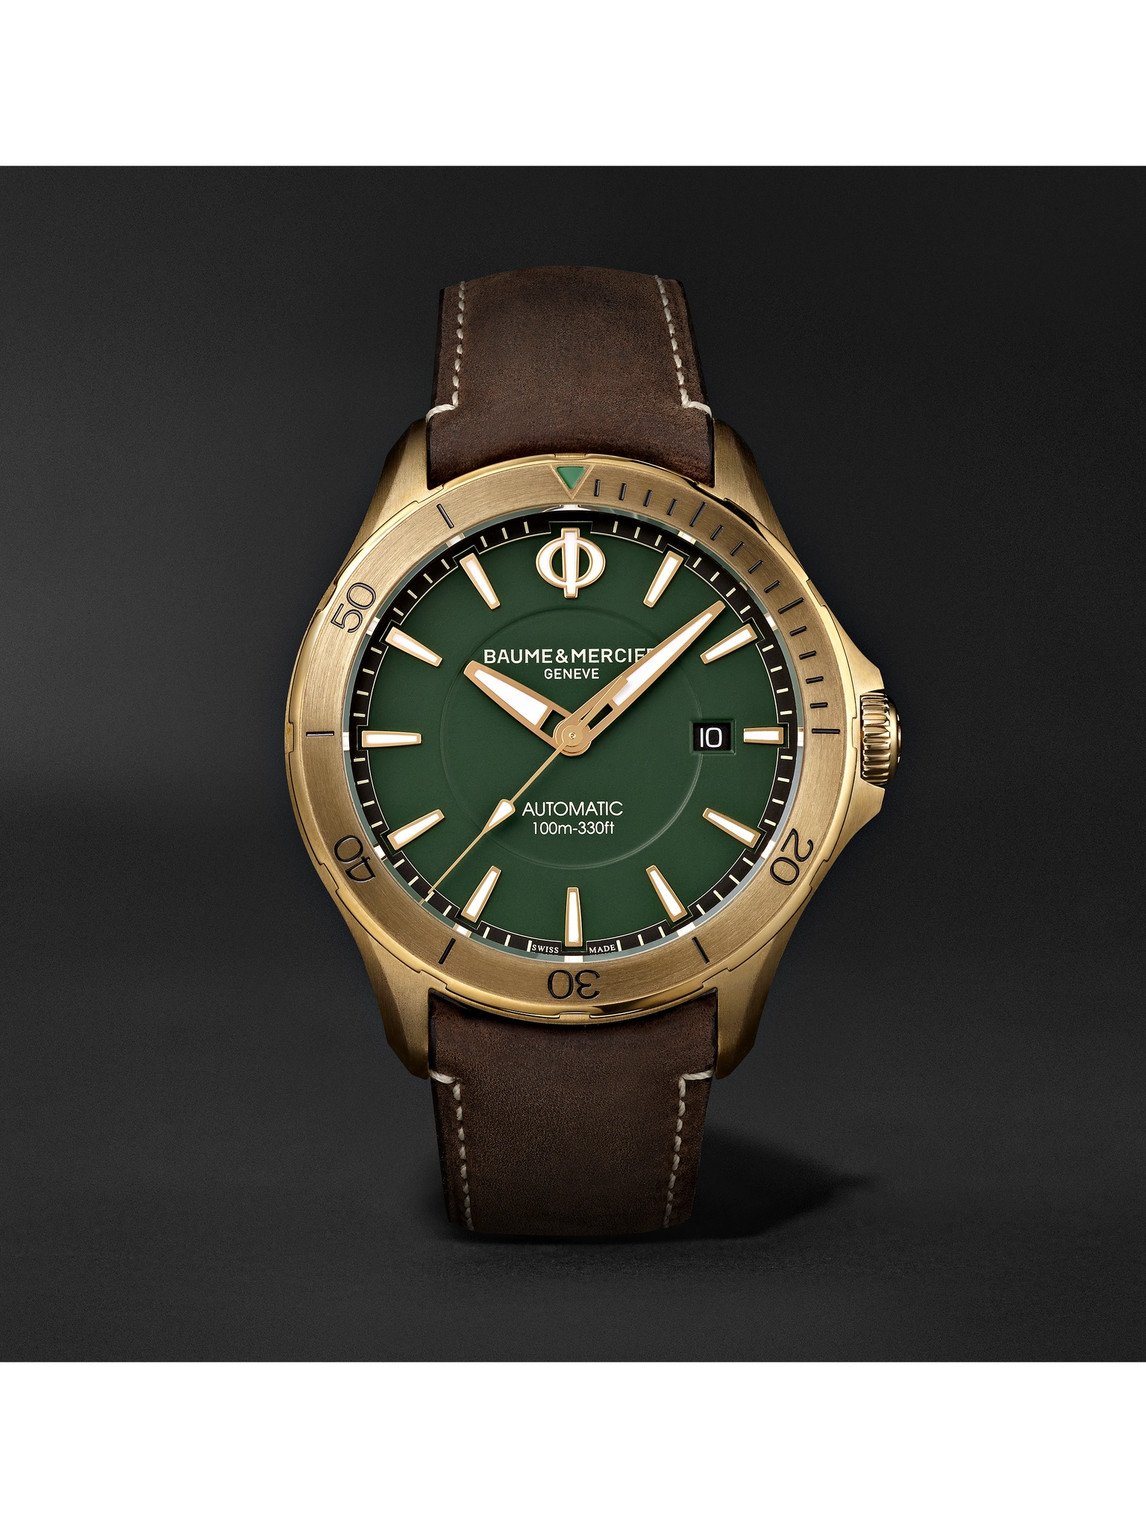 Baume & Mercier Clifton Club Automatic 42mm Bronze And Suede Watch, Ref. No. M0a10503 In Green/brown